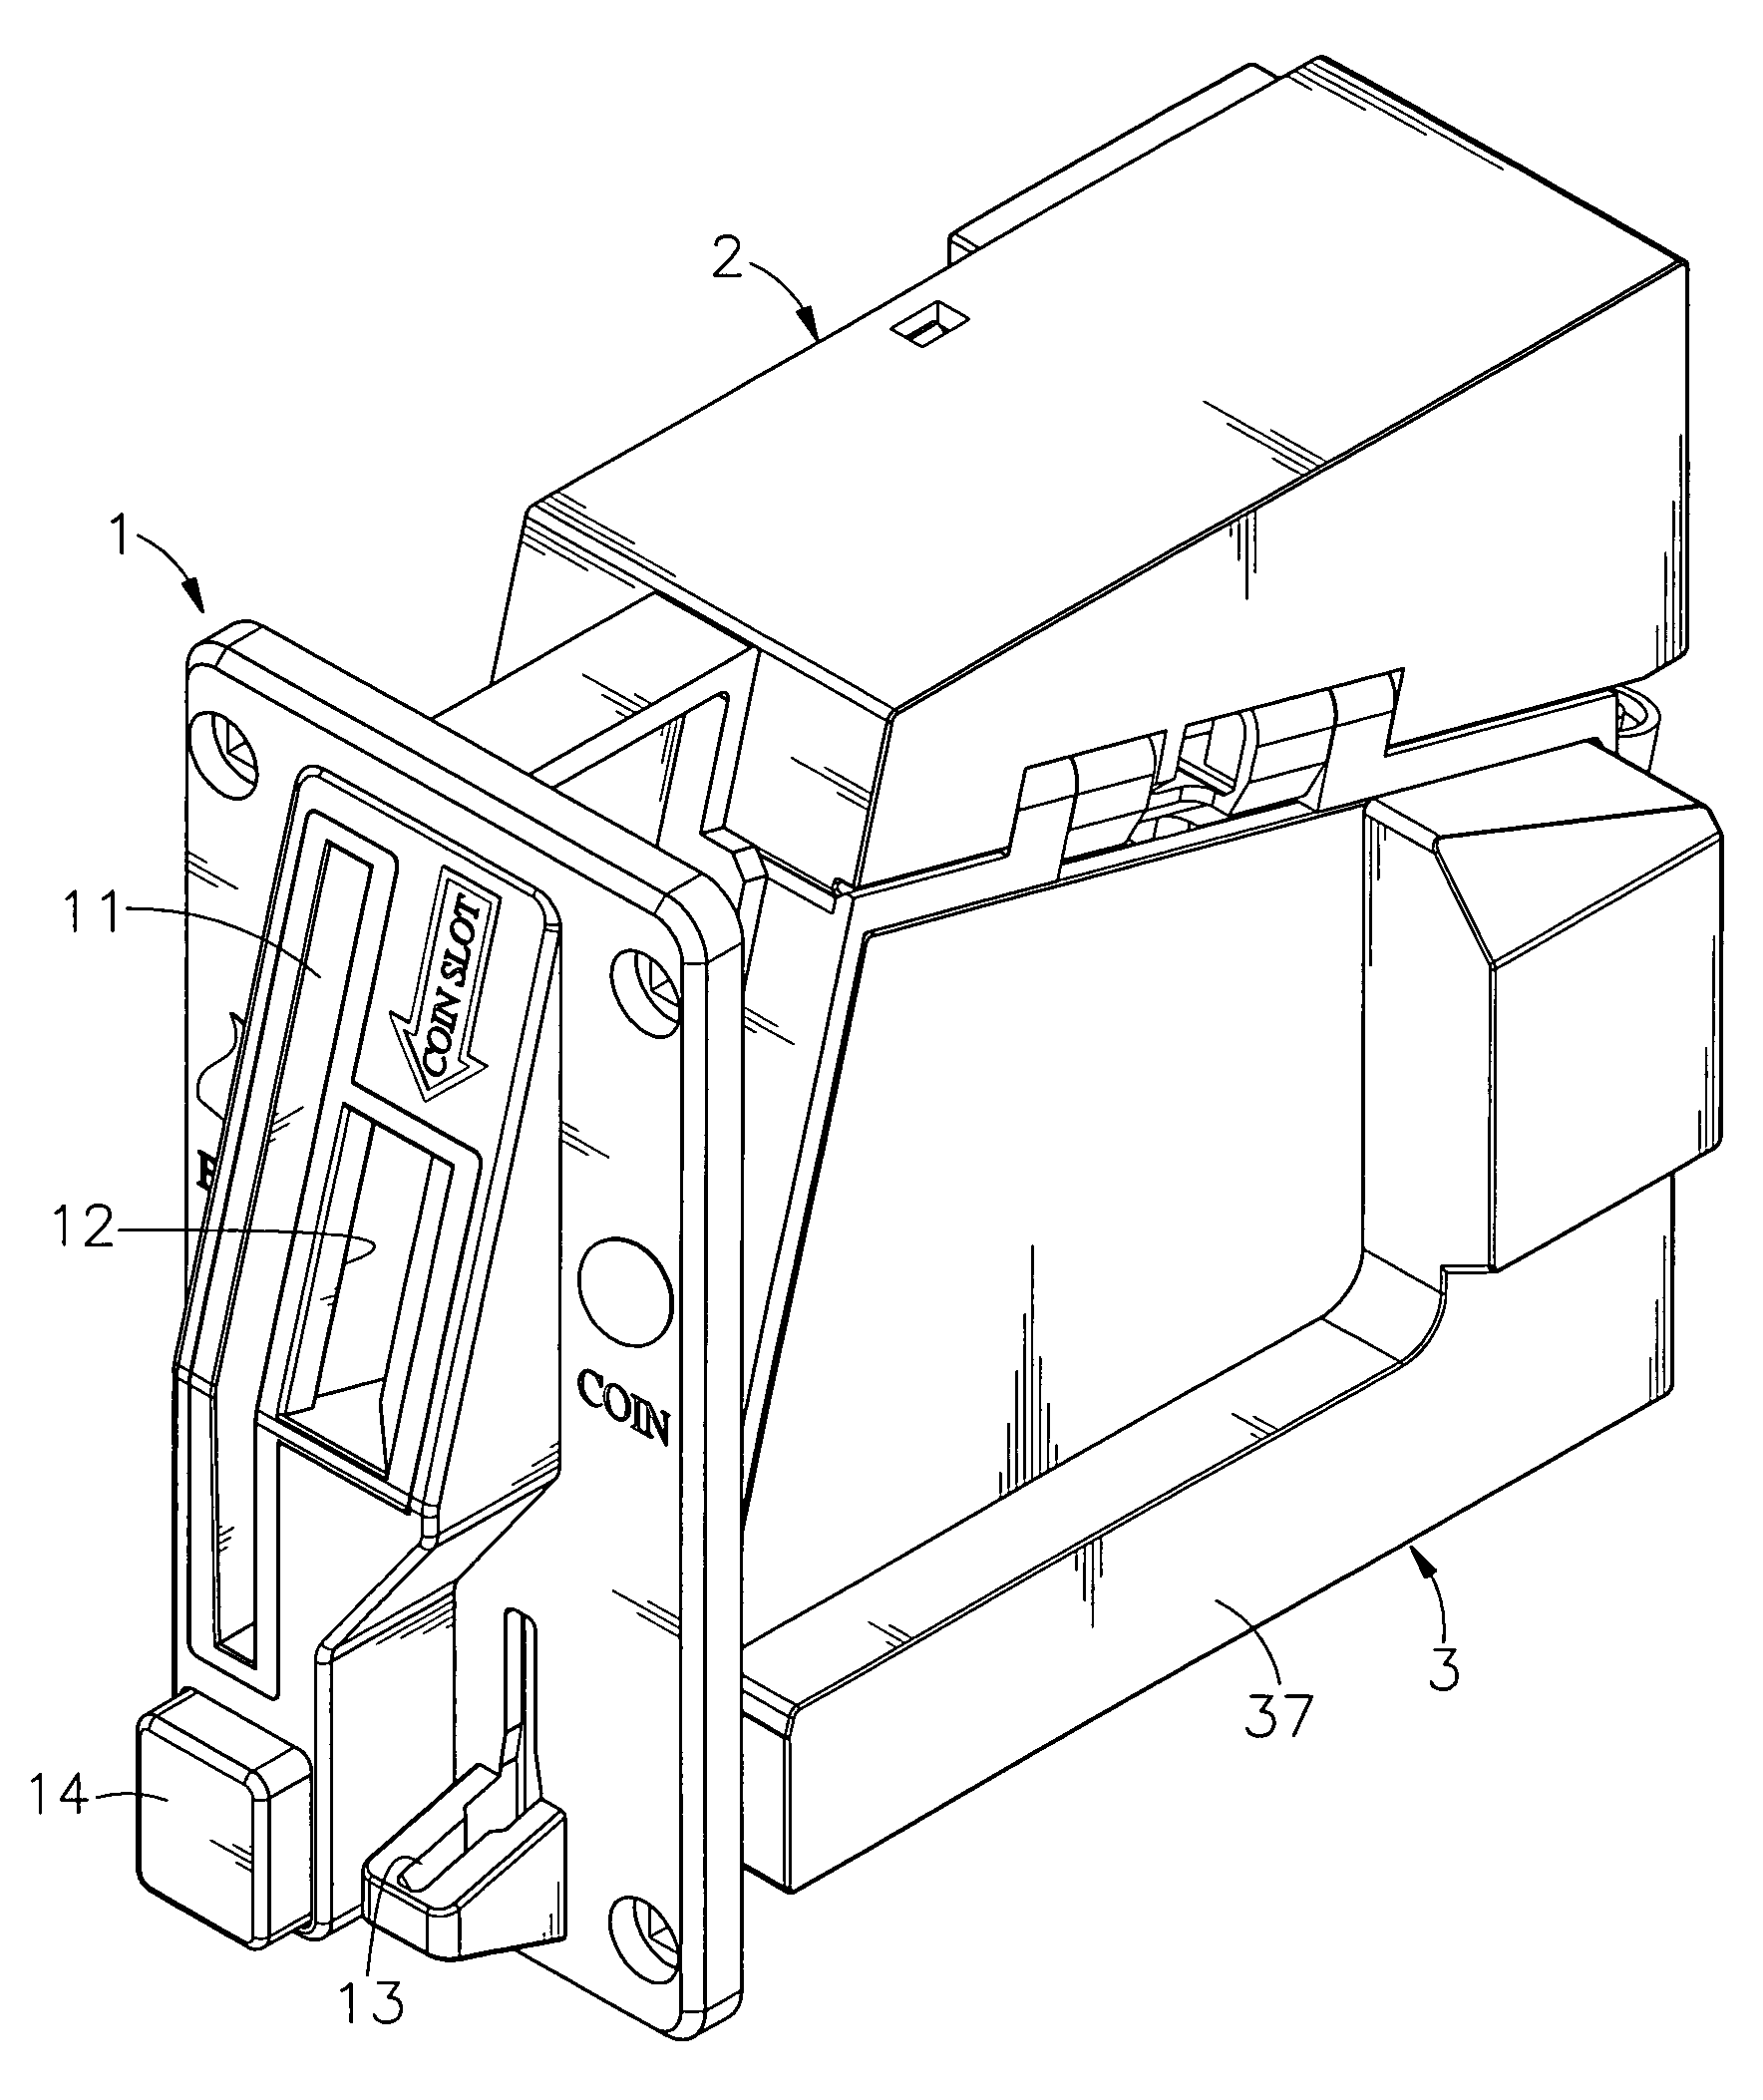 Bill and coin acceptor